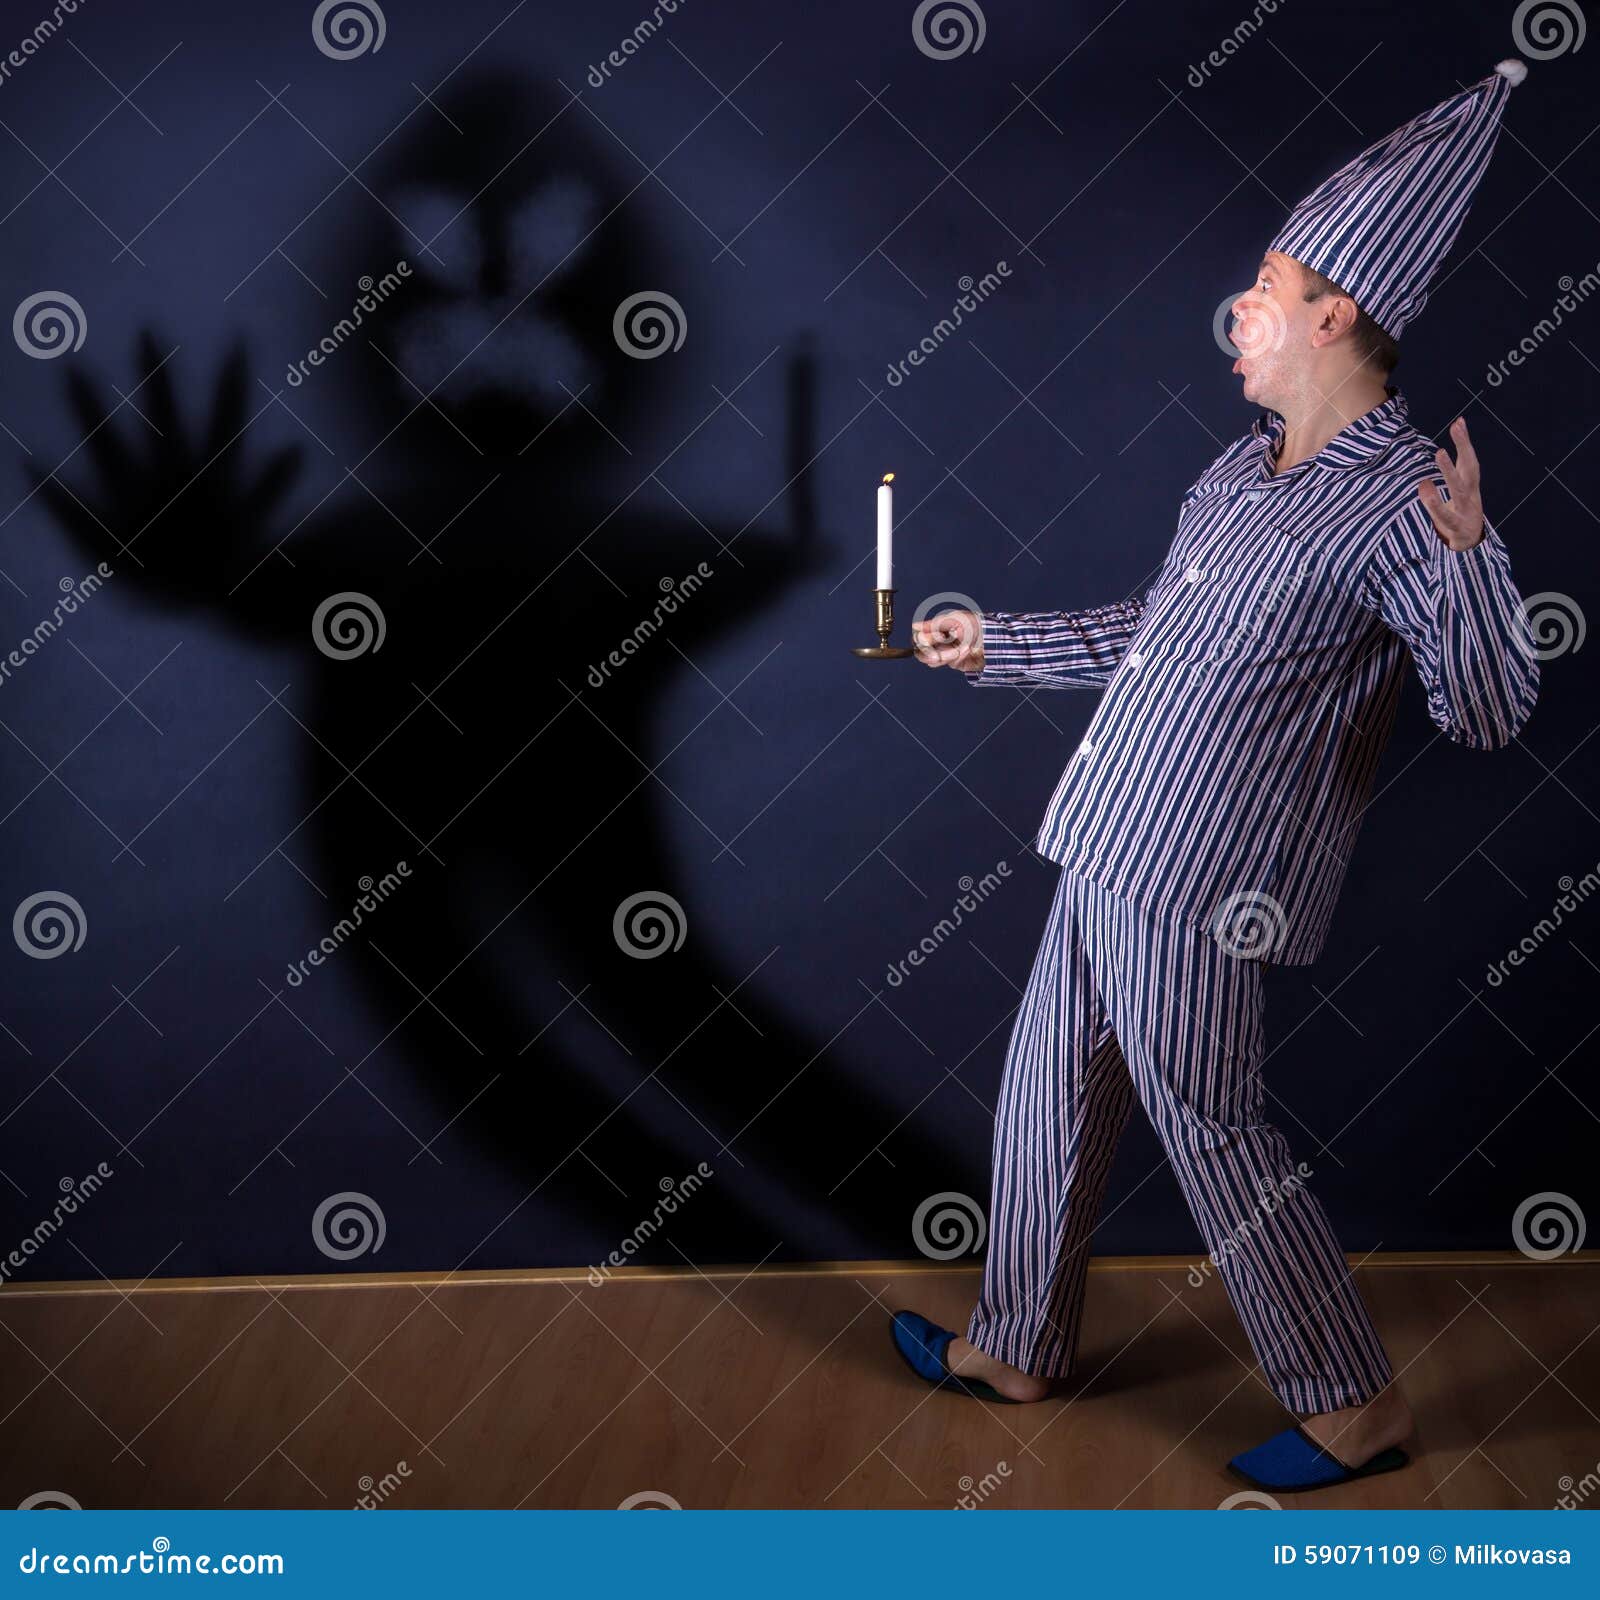 Man with candle stock image. Image of light, clothes - 59071109